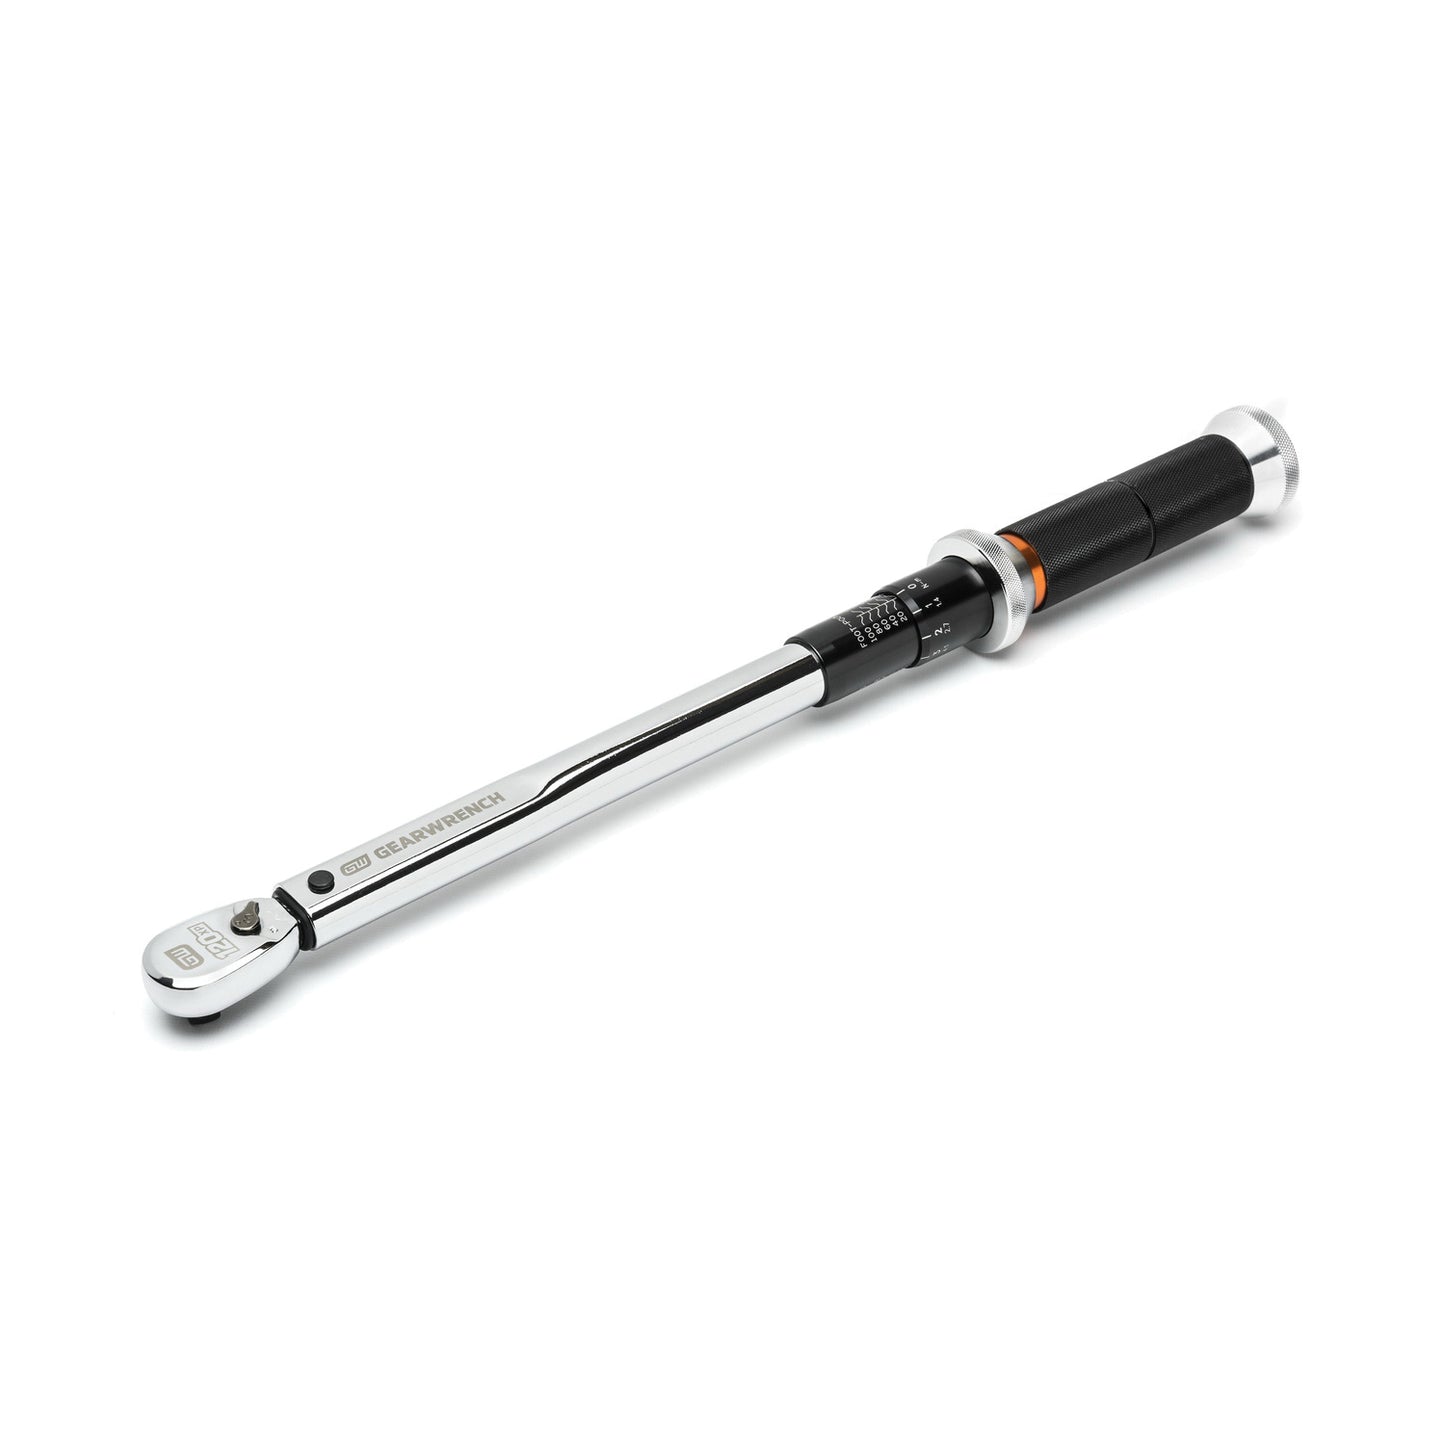 GEARWRENCH® 120XP™ 85176 Micrometer Torque Wrench  3/8 in Drive